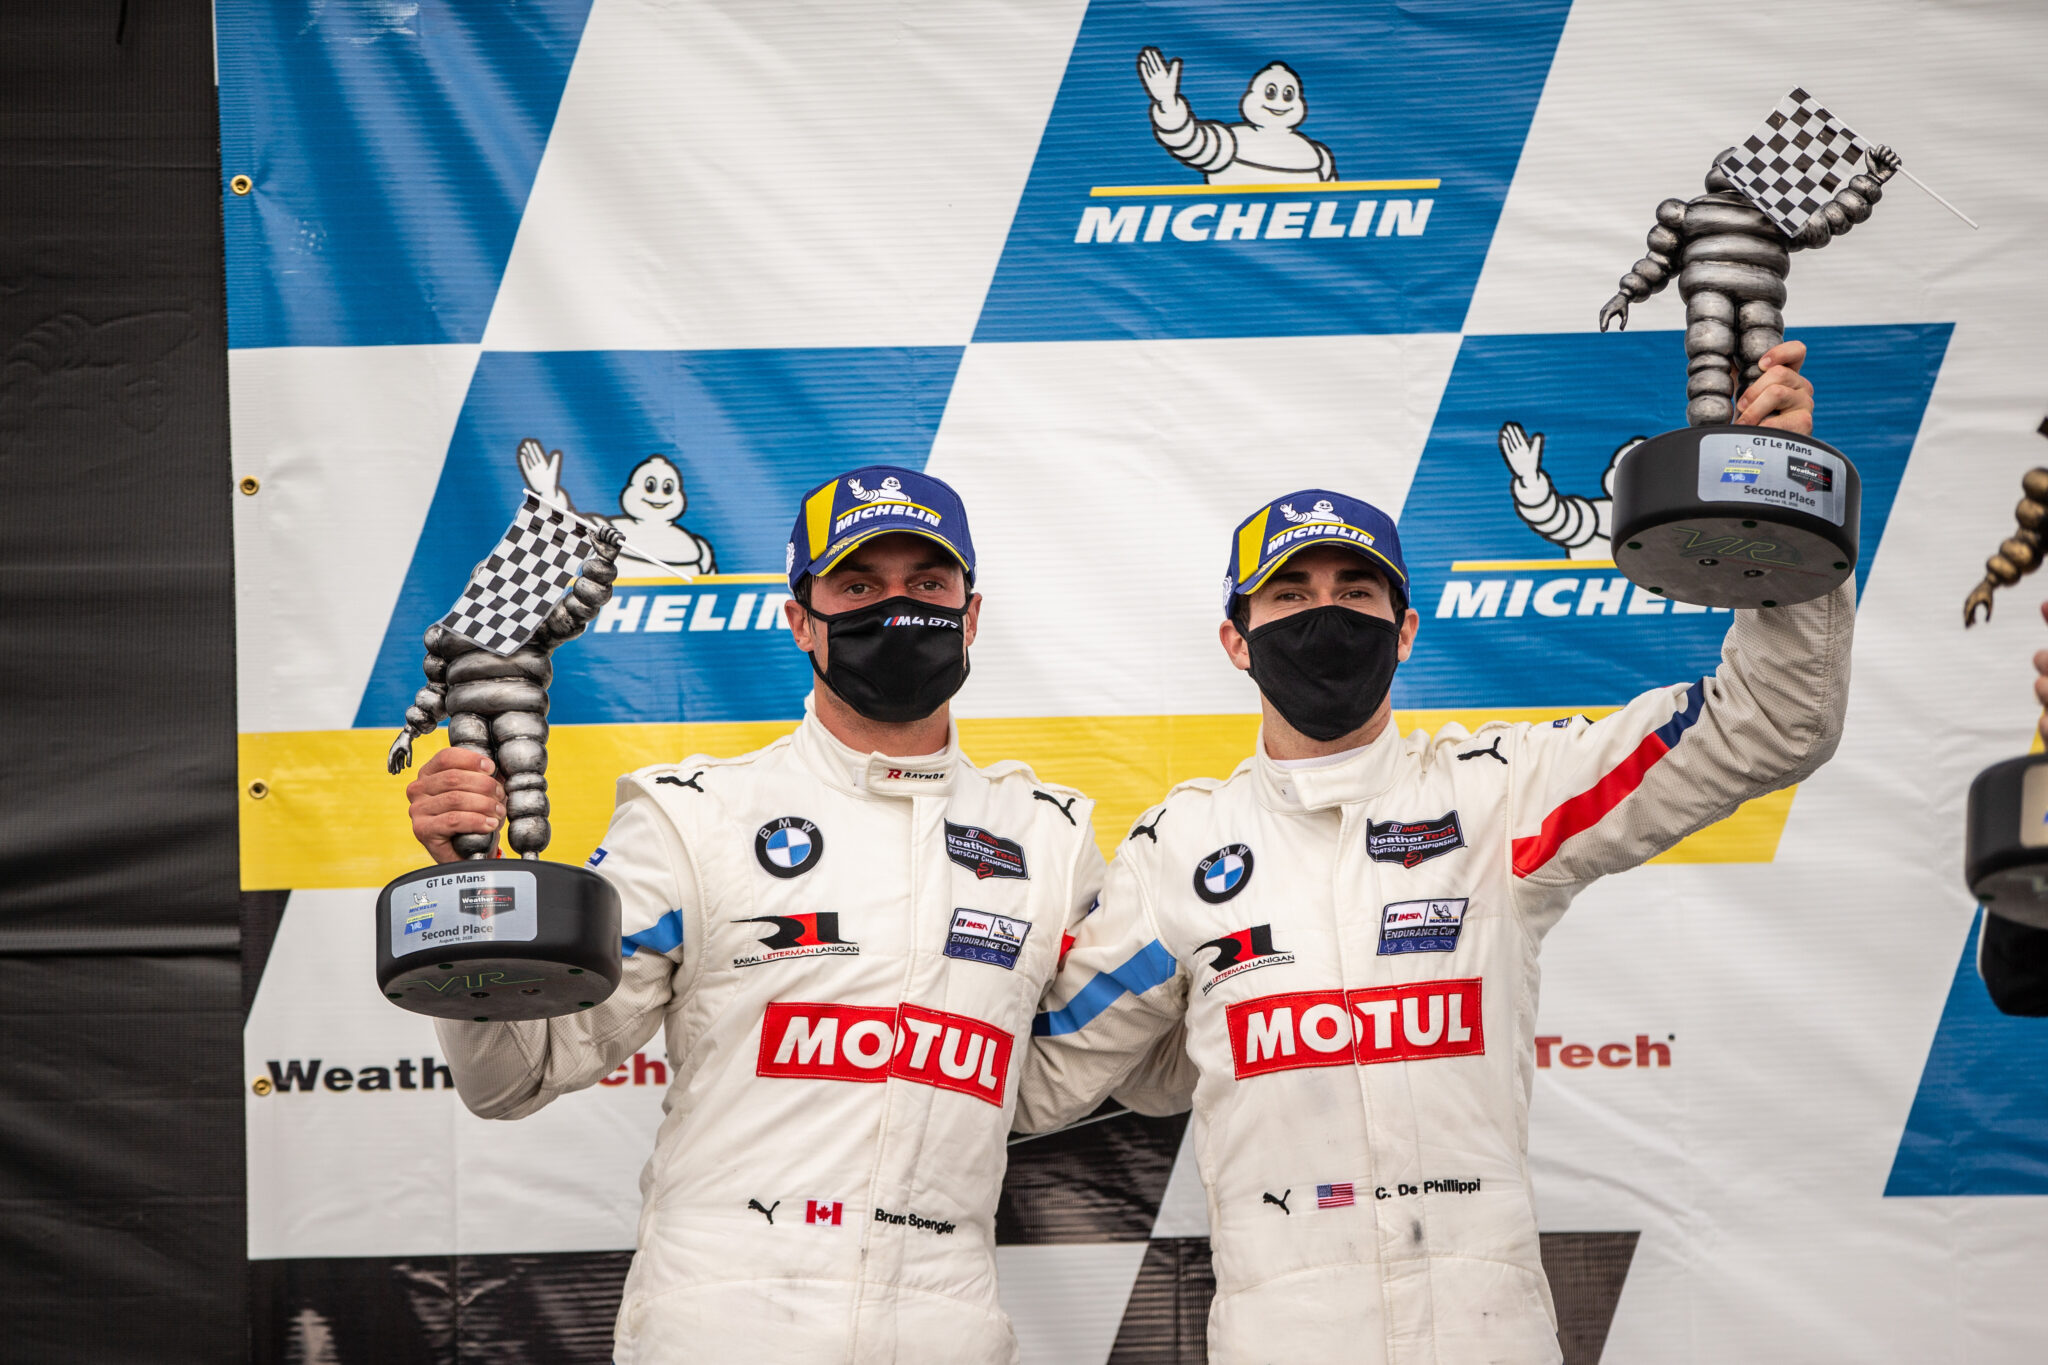 Podium finish for the BMW Team RLL, Auberlen snatched victory